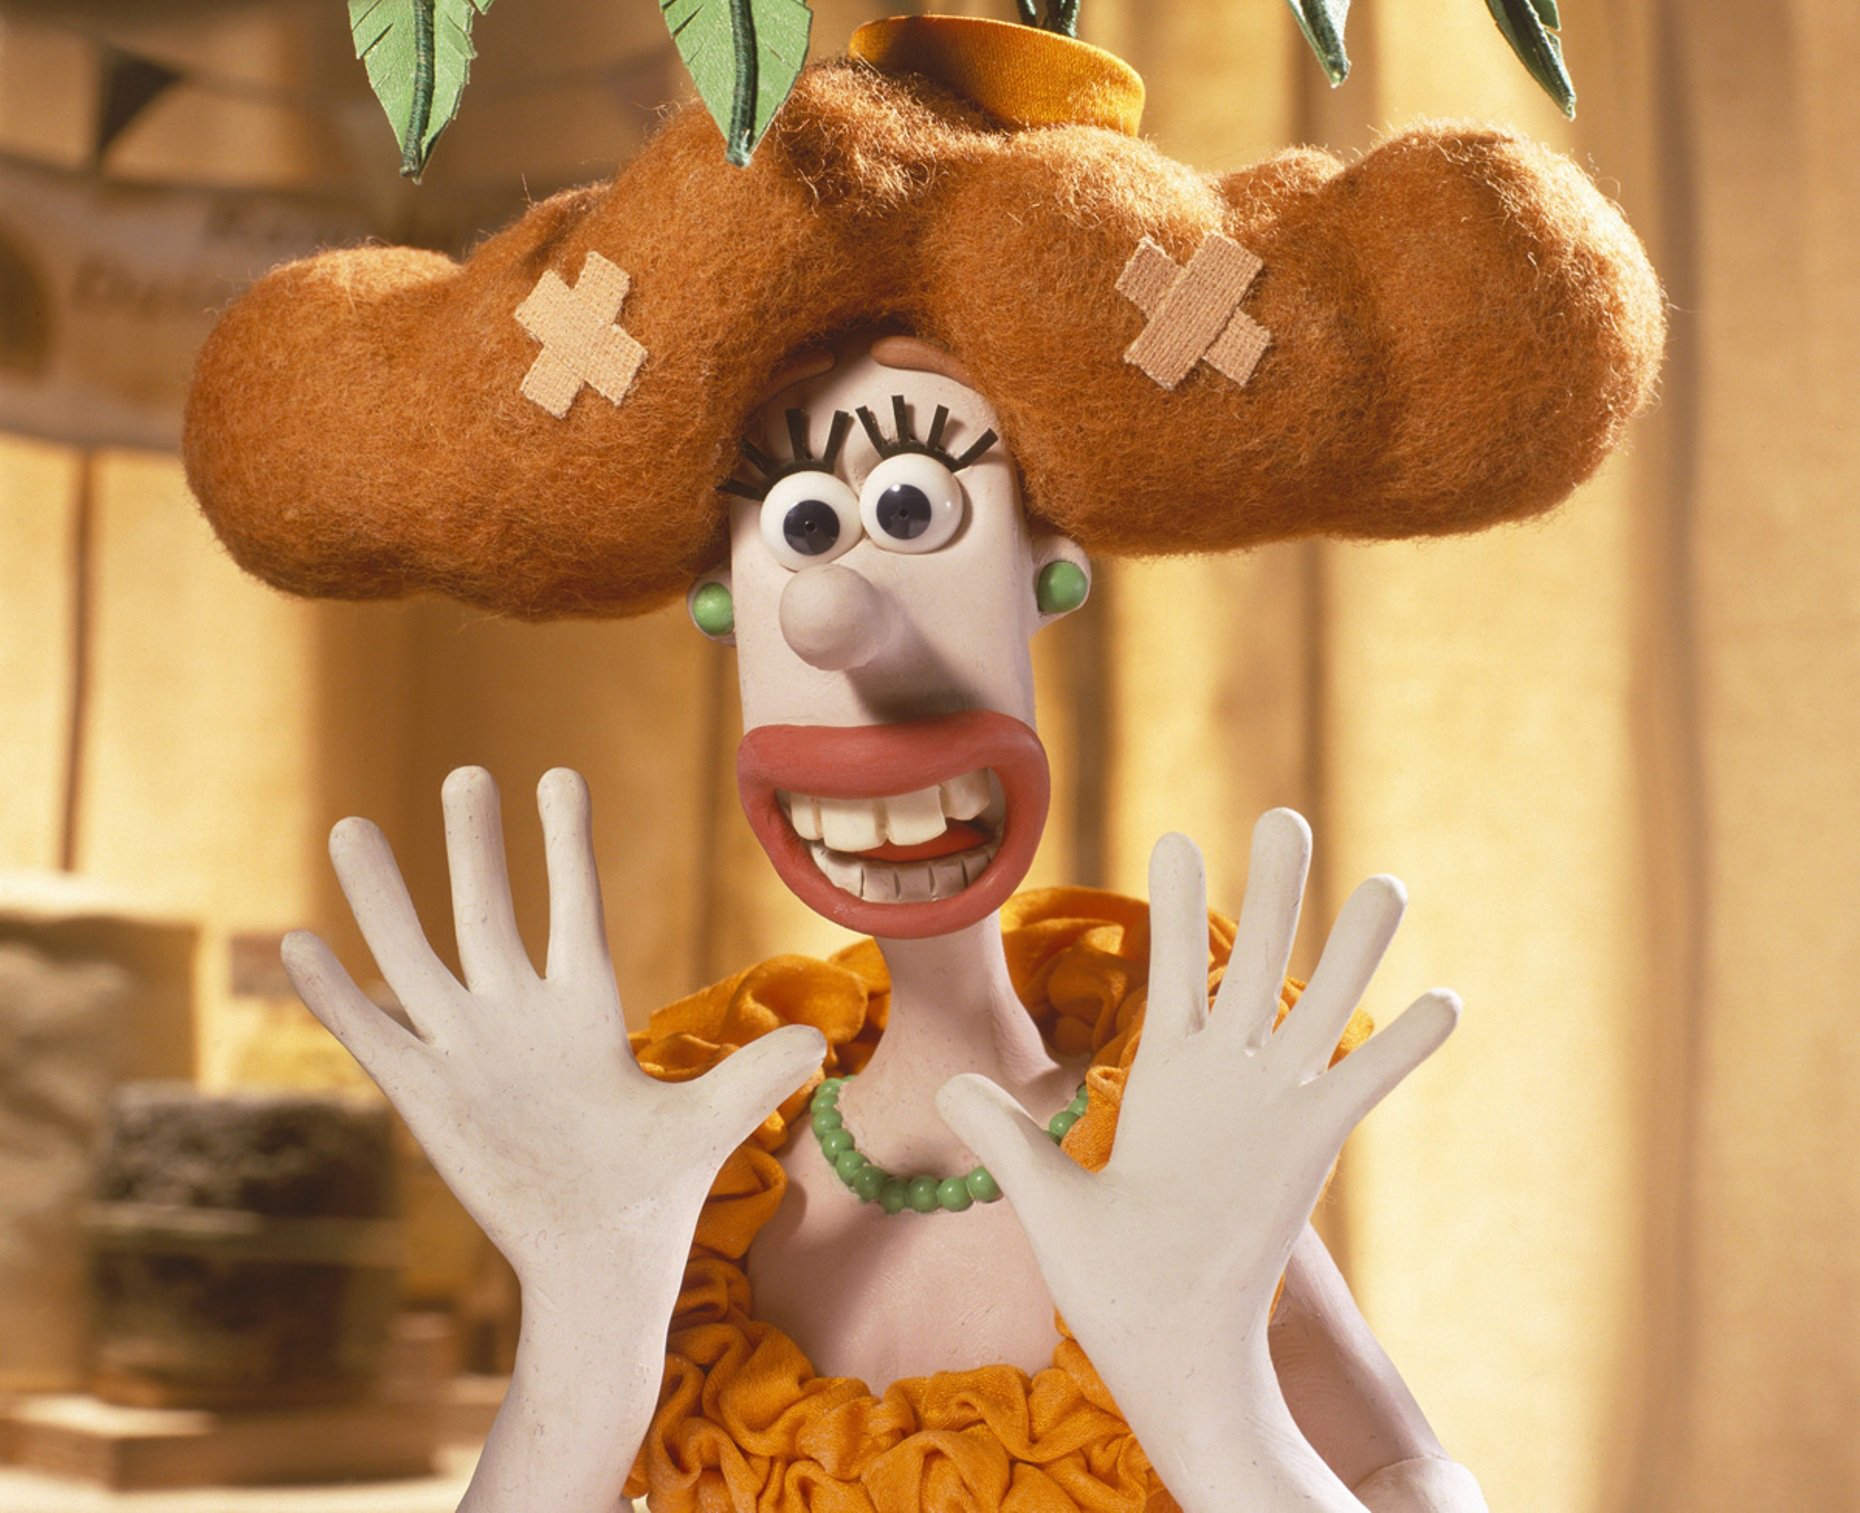 Download hd wallpapers of 563565-wallace, Gromit, Comedy, Animation, Family...